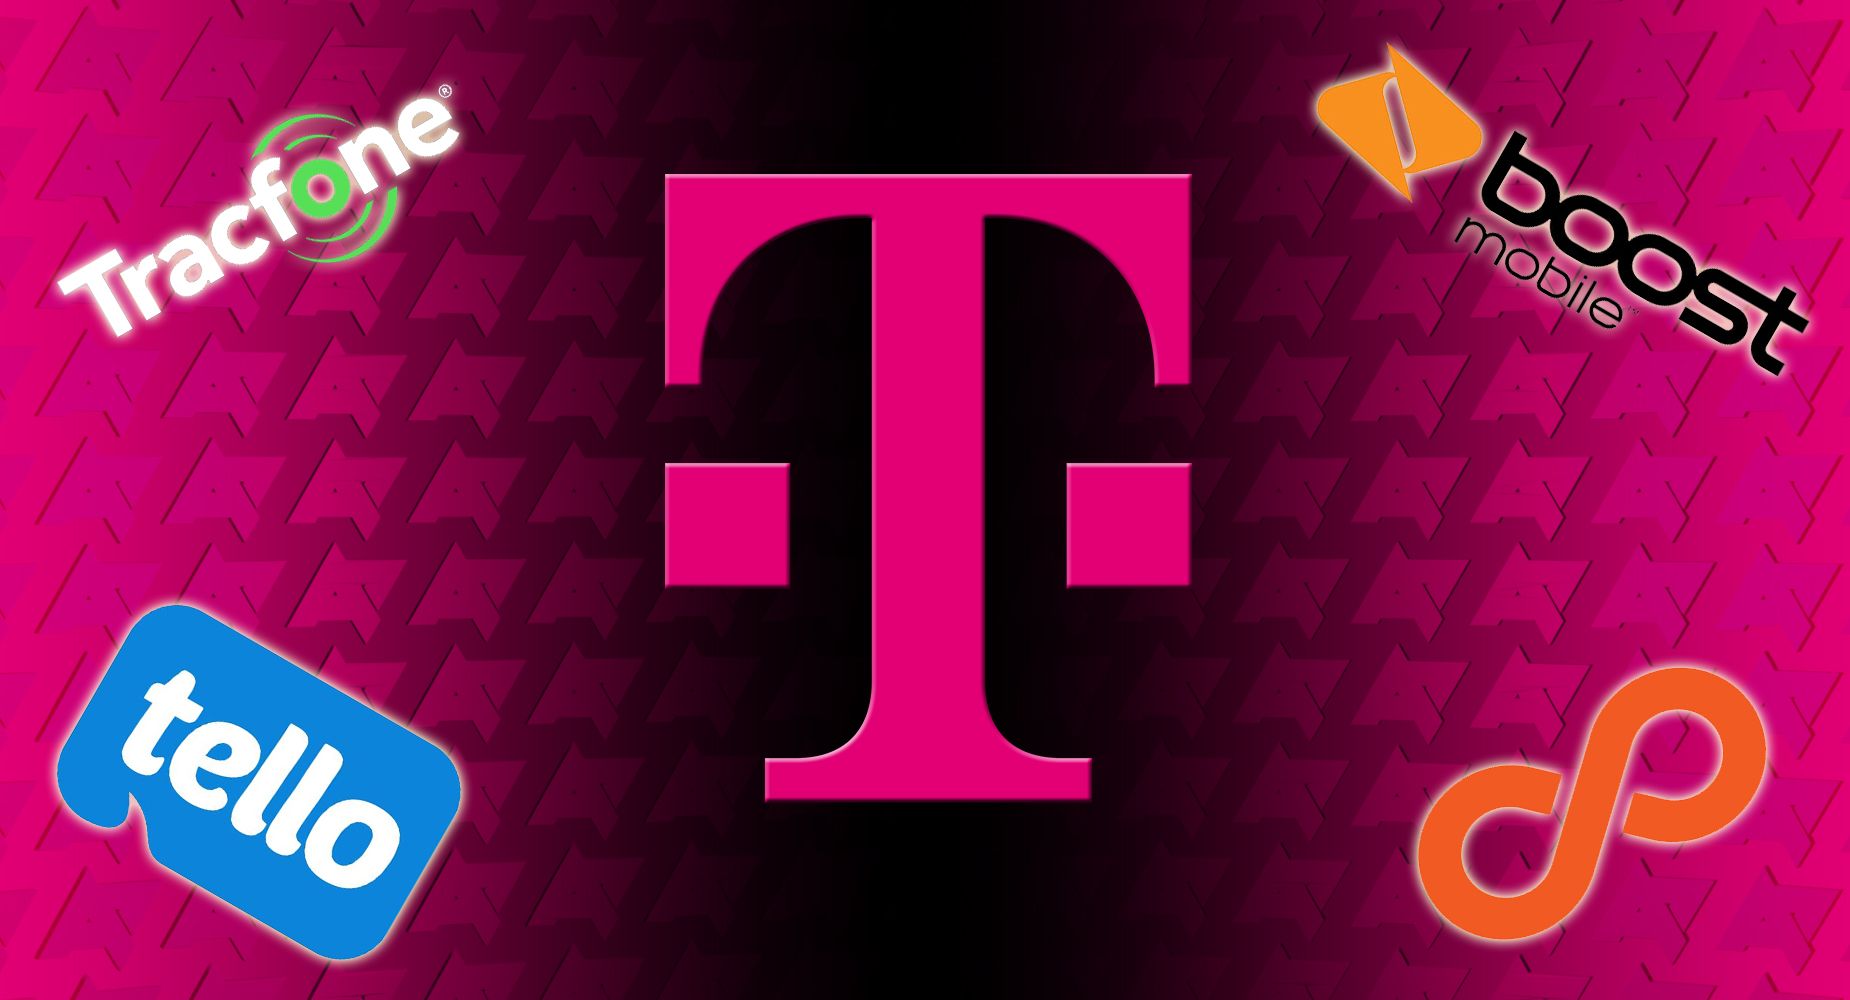 T-Mobile logo surrounded by Tracfone, Boost Mobile, Boos Infinite, and Tello logos, over a field of AP logos